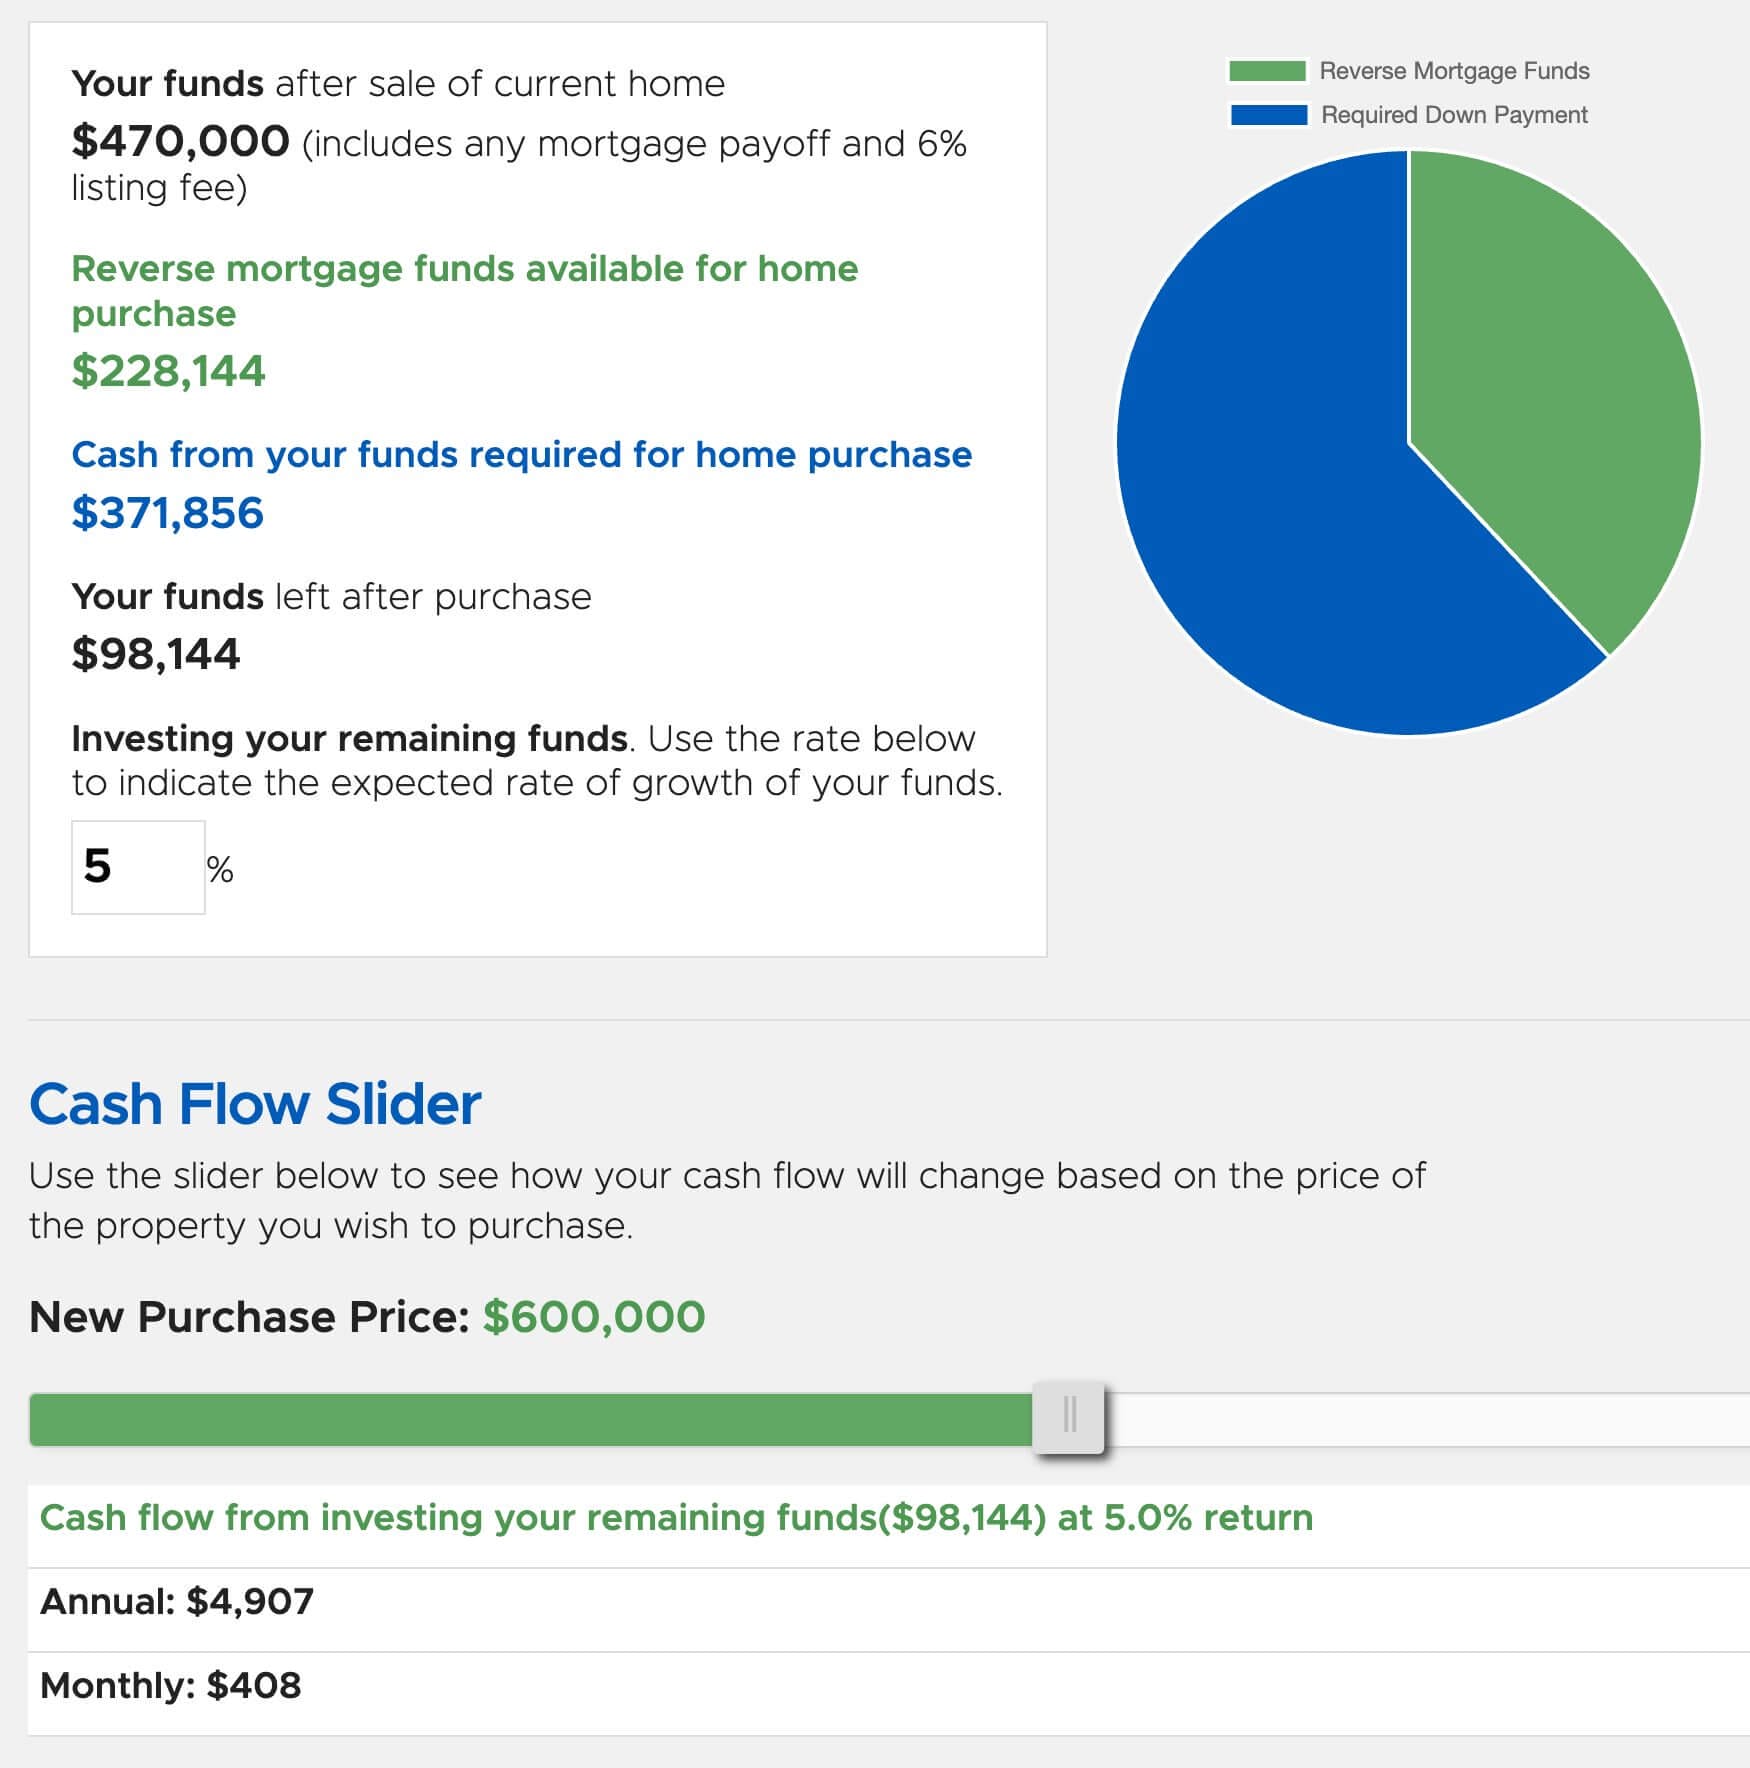 Cash flow illustration with pie chart downsizing to $600k sales price 